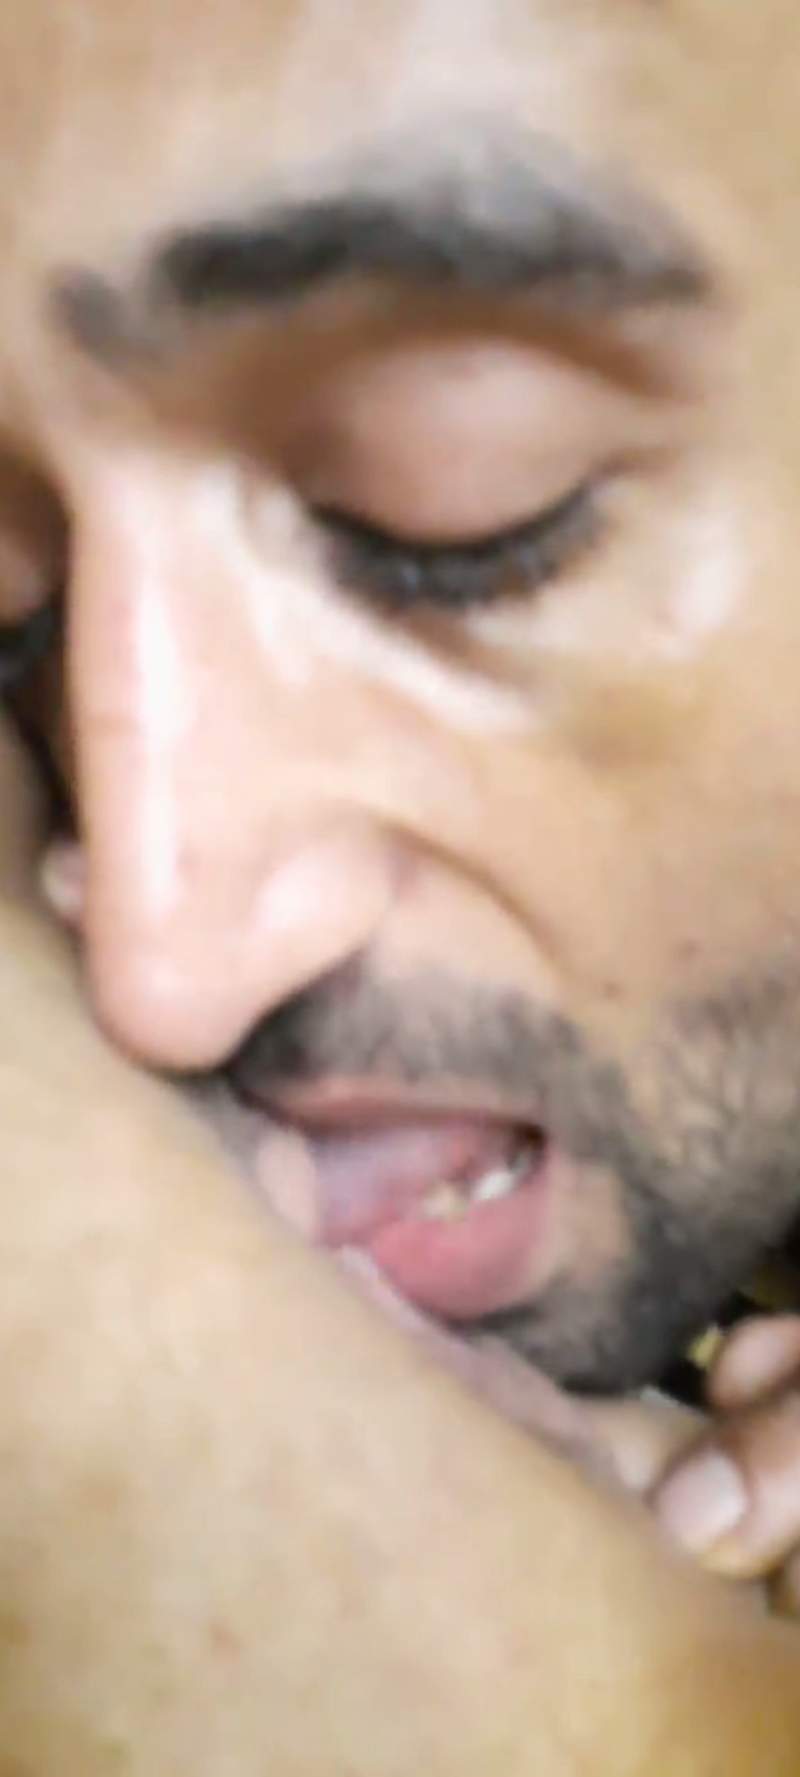 I love eating pussy and I eat my wife pussy every night and make her squirt